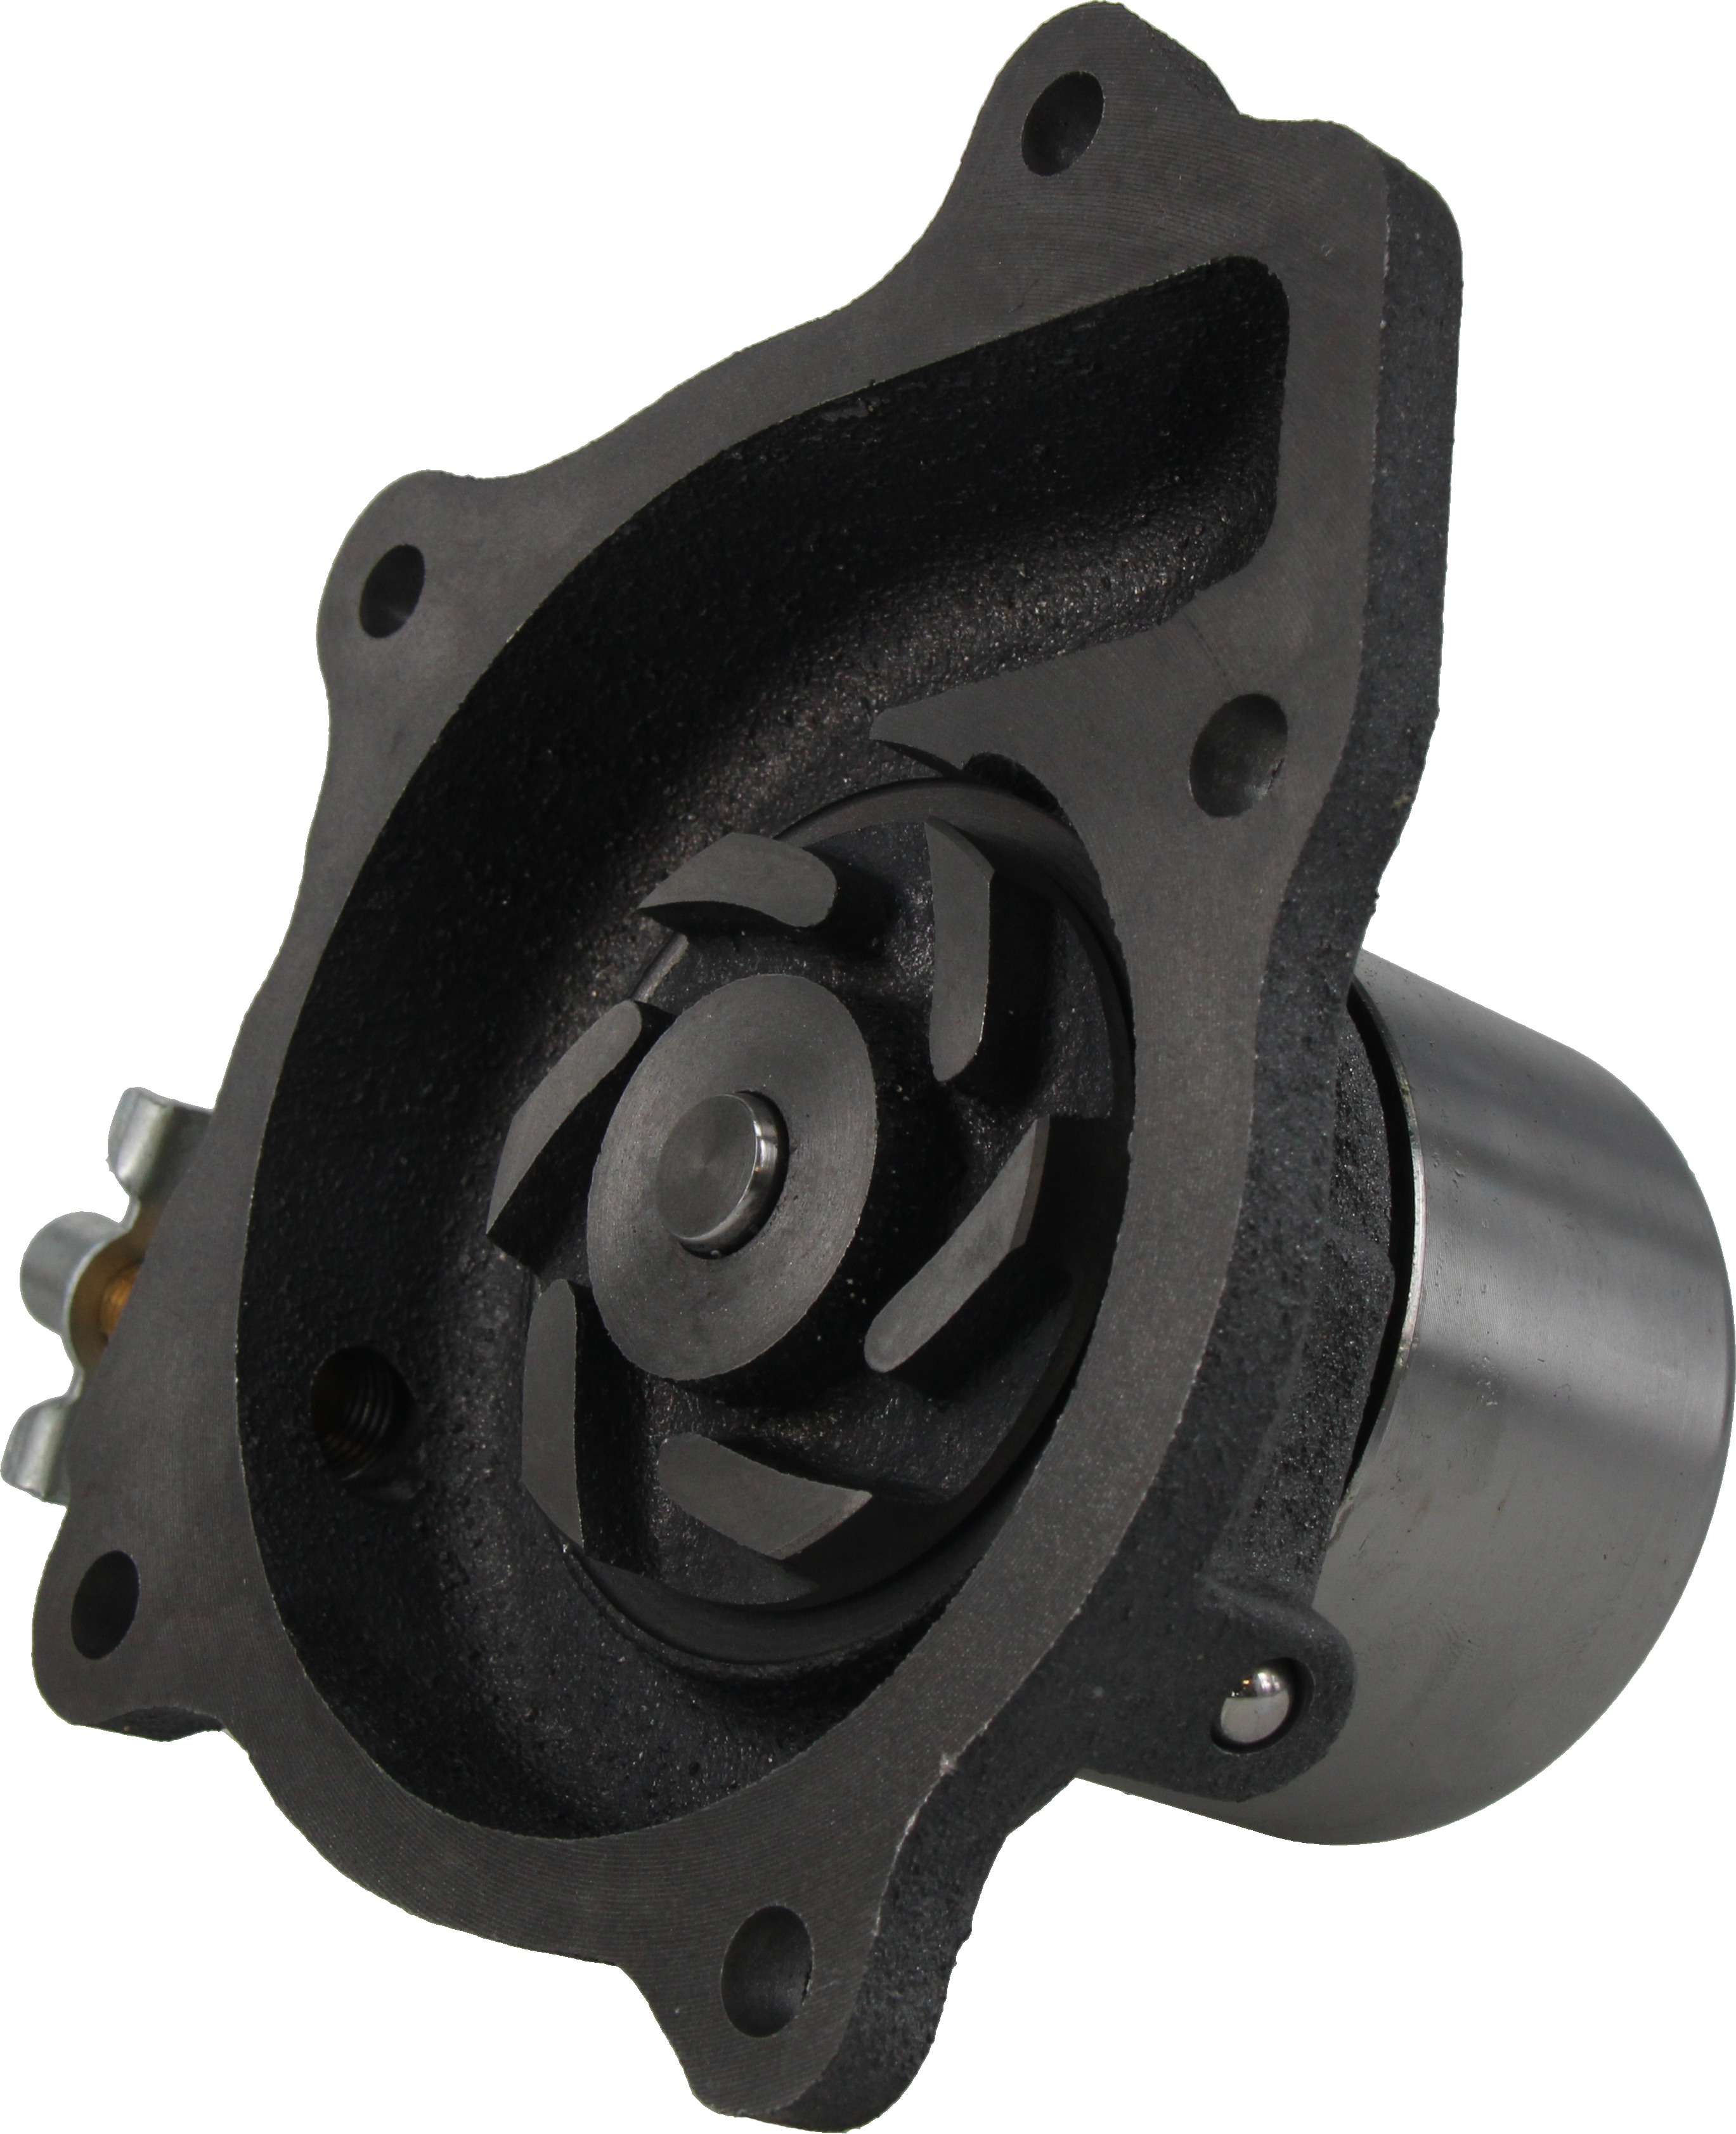 All States Ag Parts Water Pump Compatible with John Deere 244J CT315 323D 315 CT322 4320 317 319D 4720 4520 320D 318D 320 4120 313 RE545572 